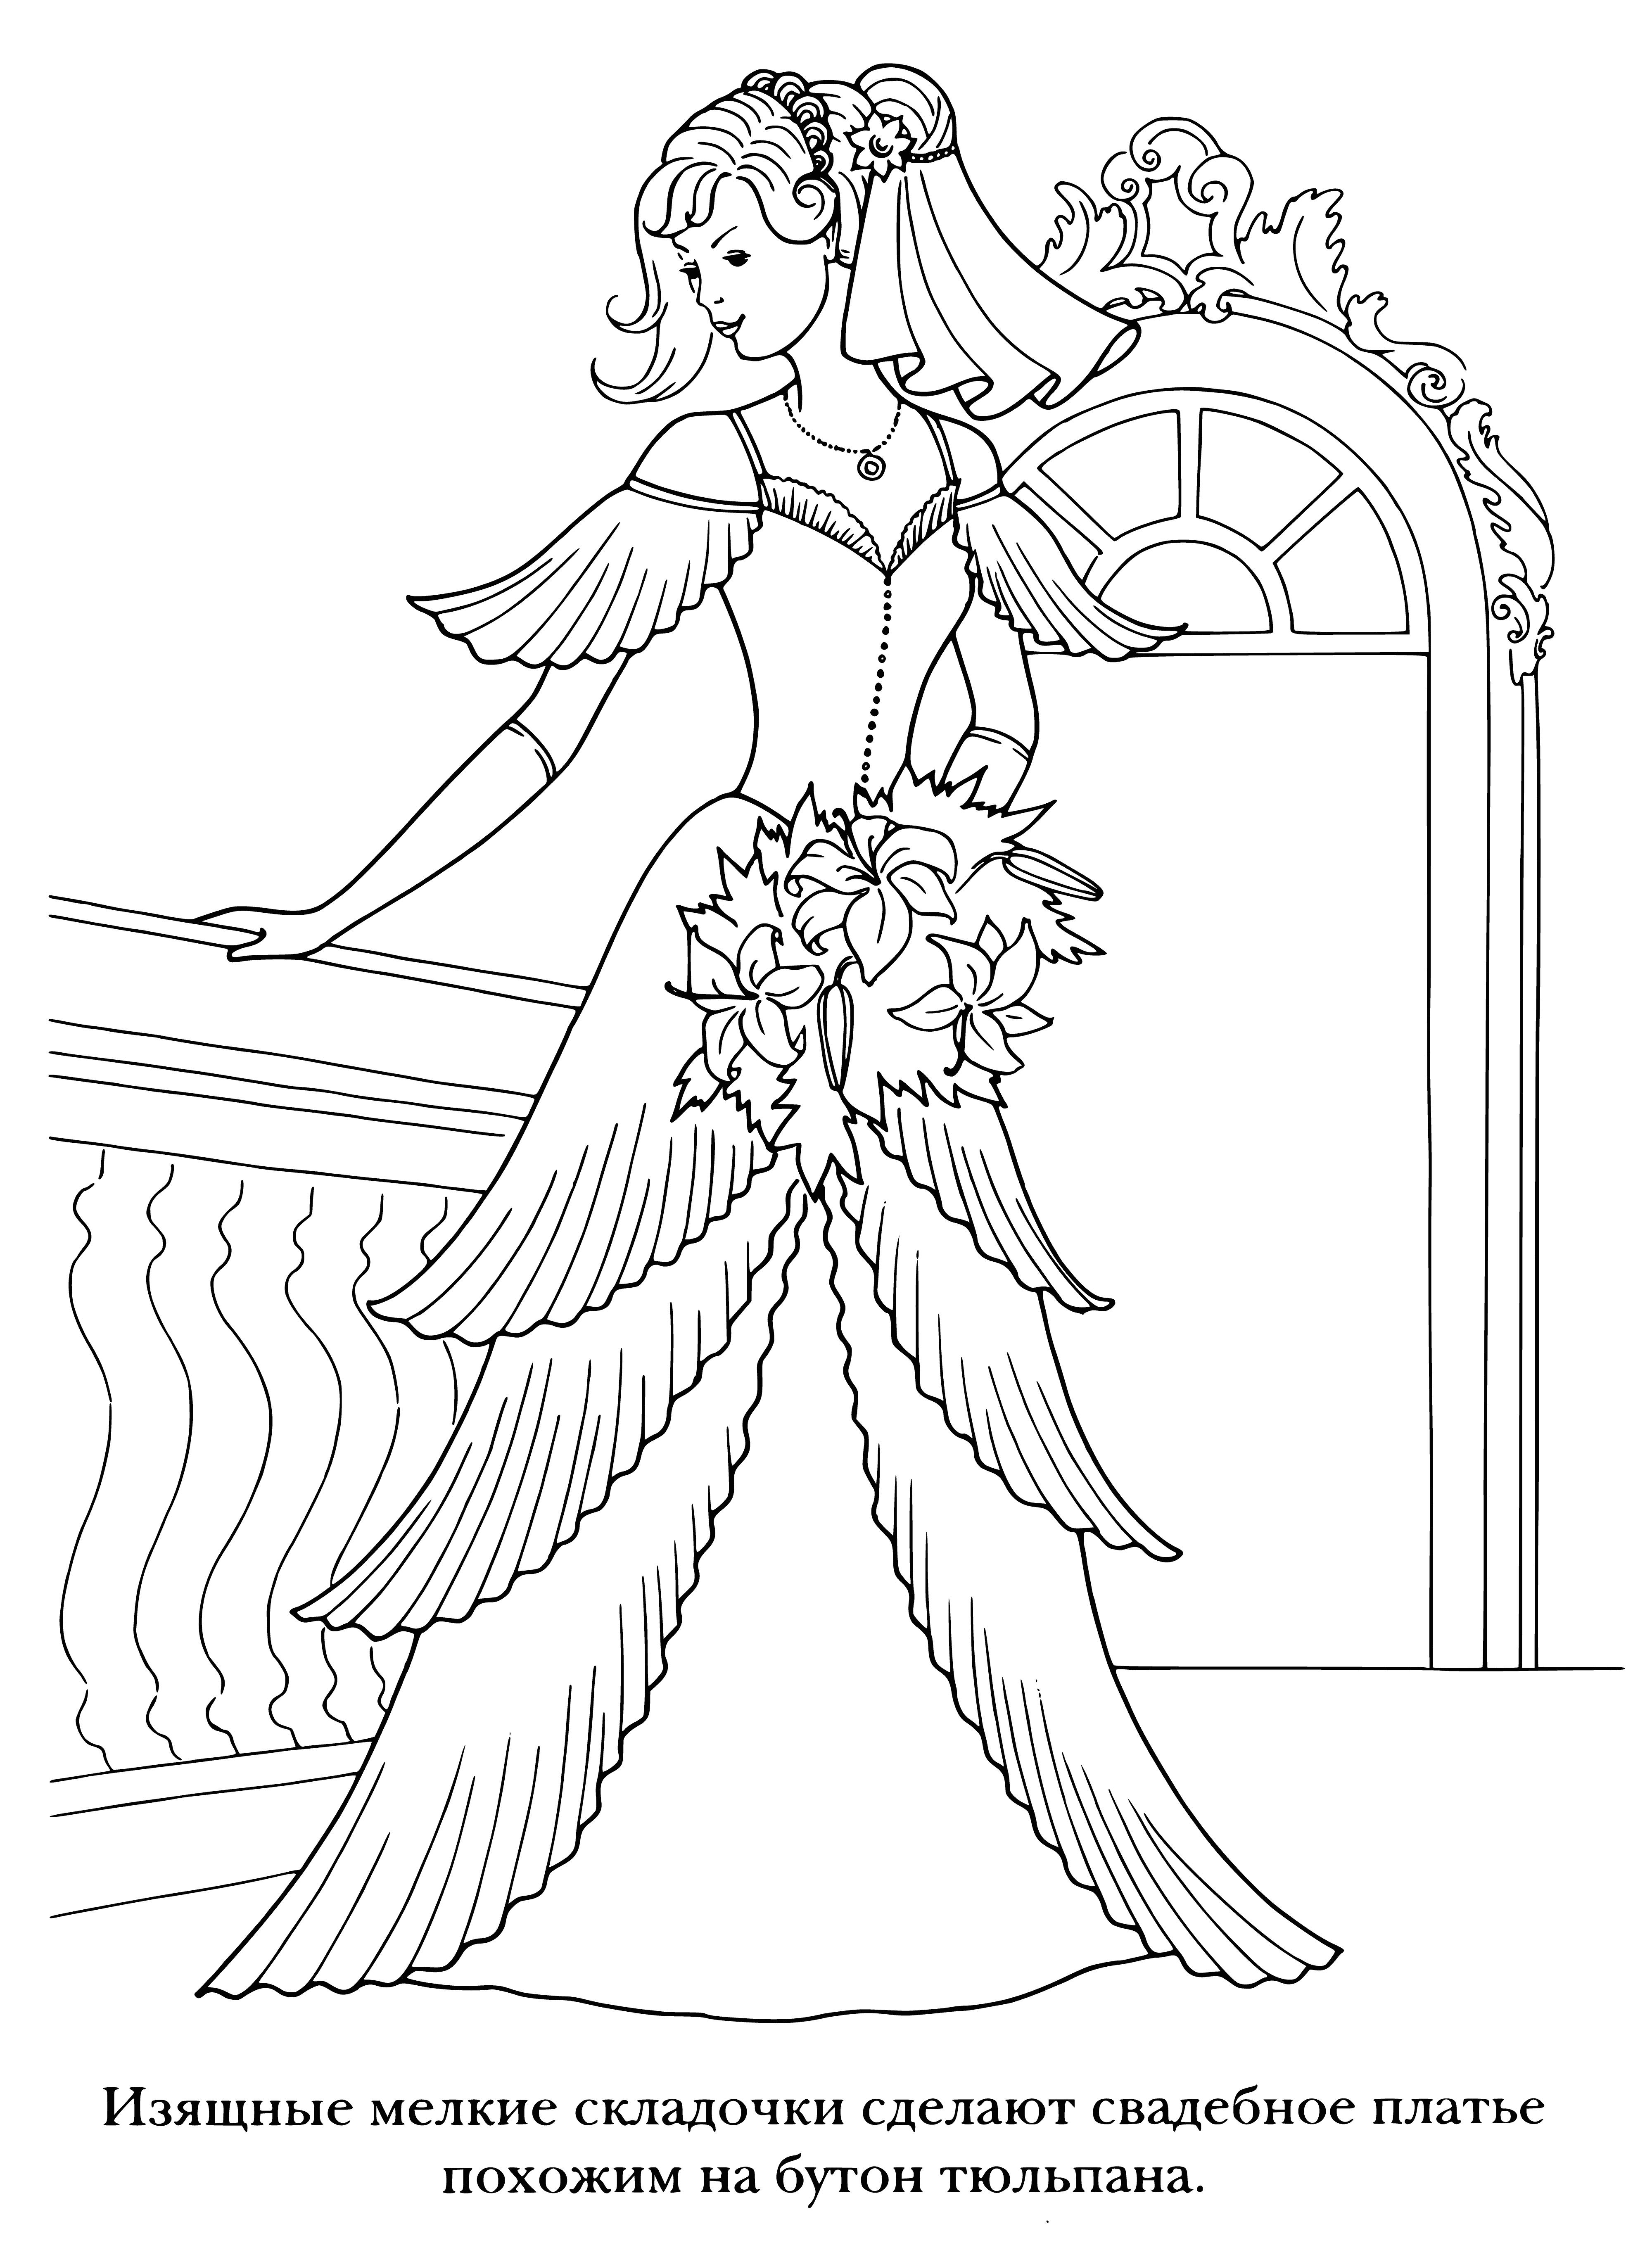 coloring page: Bride in coloring page is beautiful! She has long flowing hair, perfect makeup, and wears a stunning white dress w/ intricate beadwork & lace - looks like an angel!